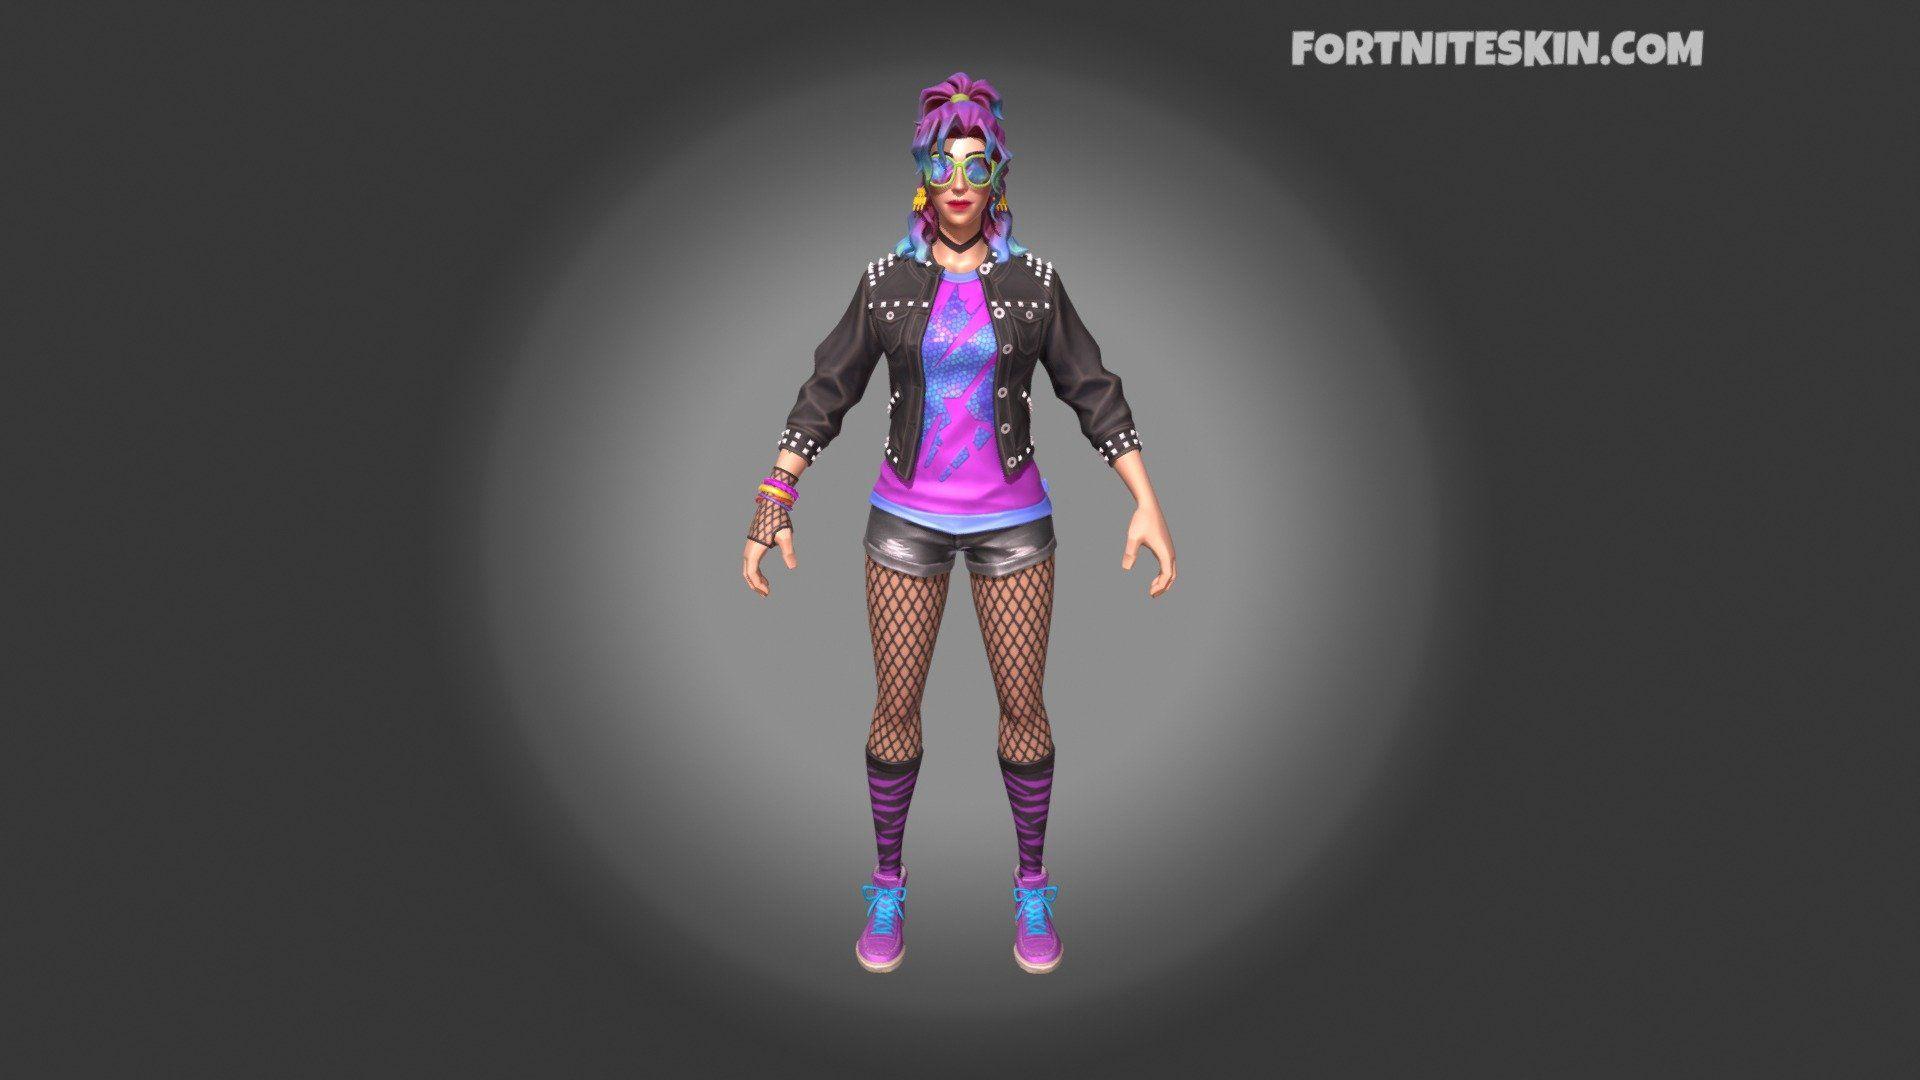 3D Models Tagged Fortnite Synth Star Outfit